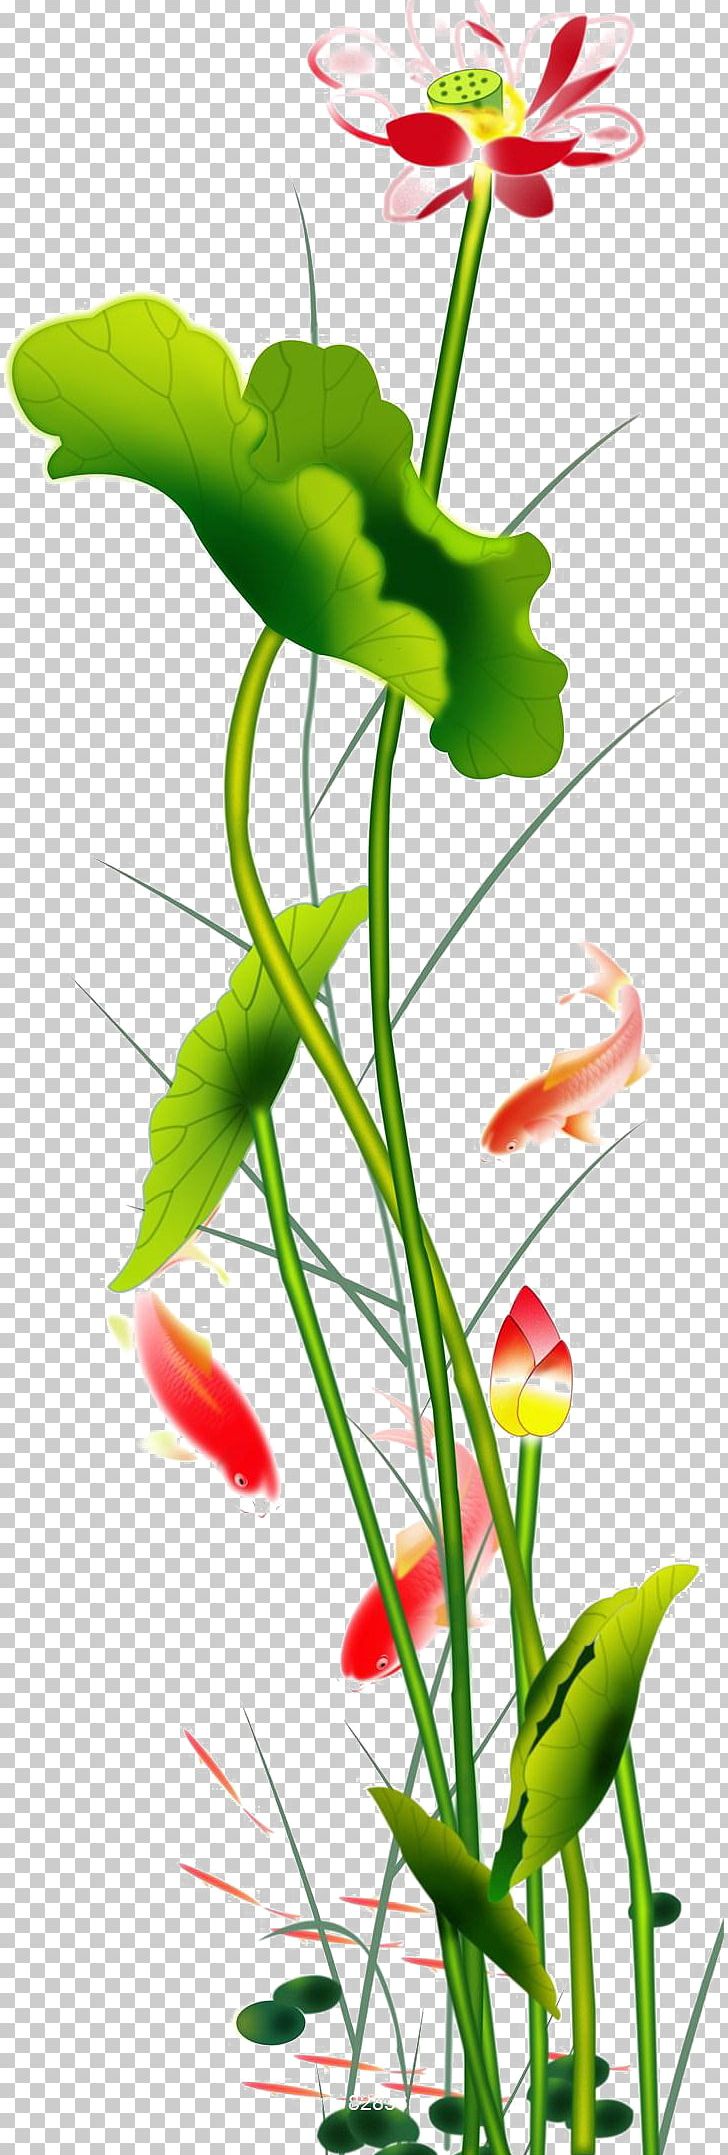 Sixeau Thu1ecb Tranh AmiA Nelumbo Nucifera U0110xf4ng Hu1ed3 Painting Oil Painting PNG, Clipart, Bedroom, Color, Drawing Room, Flora, Floral Design Free PNG Download